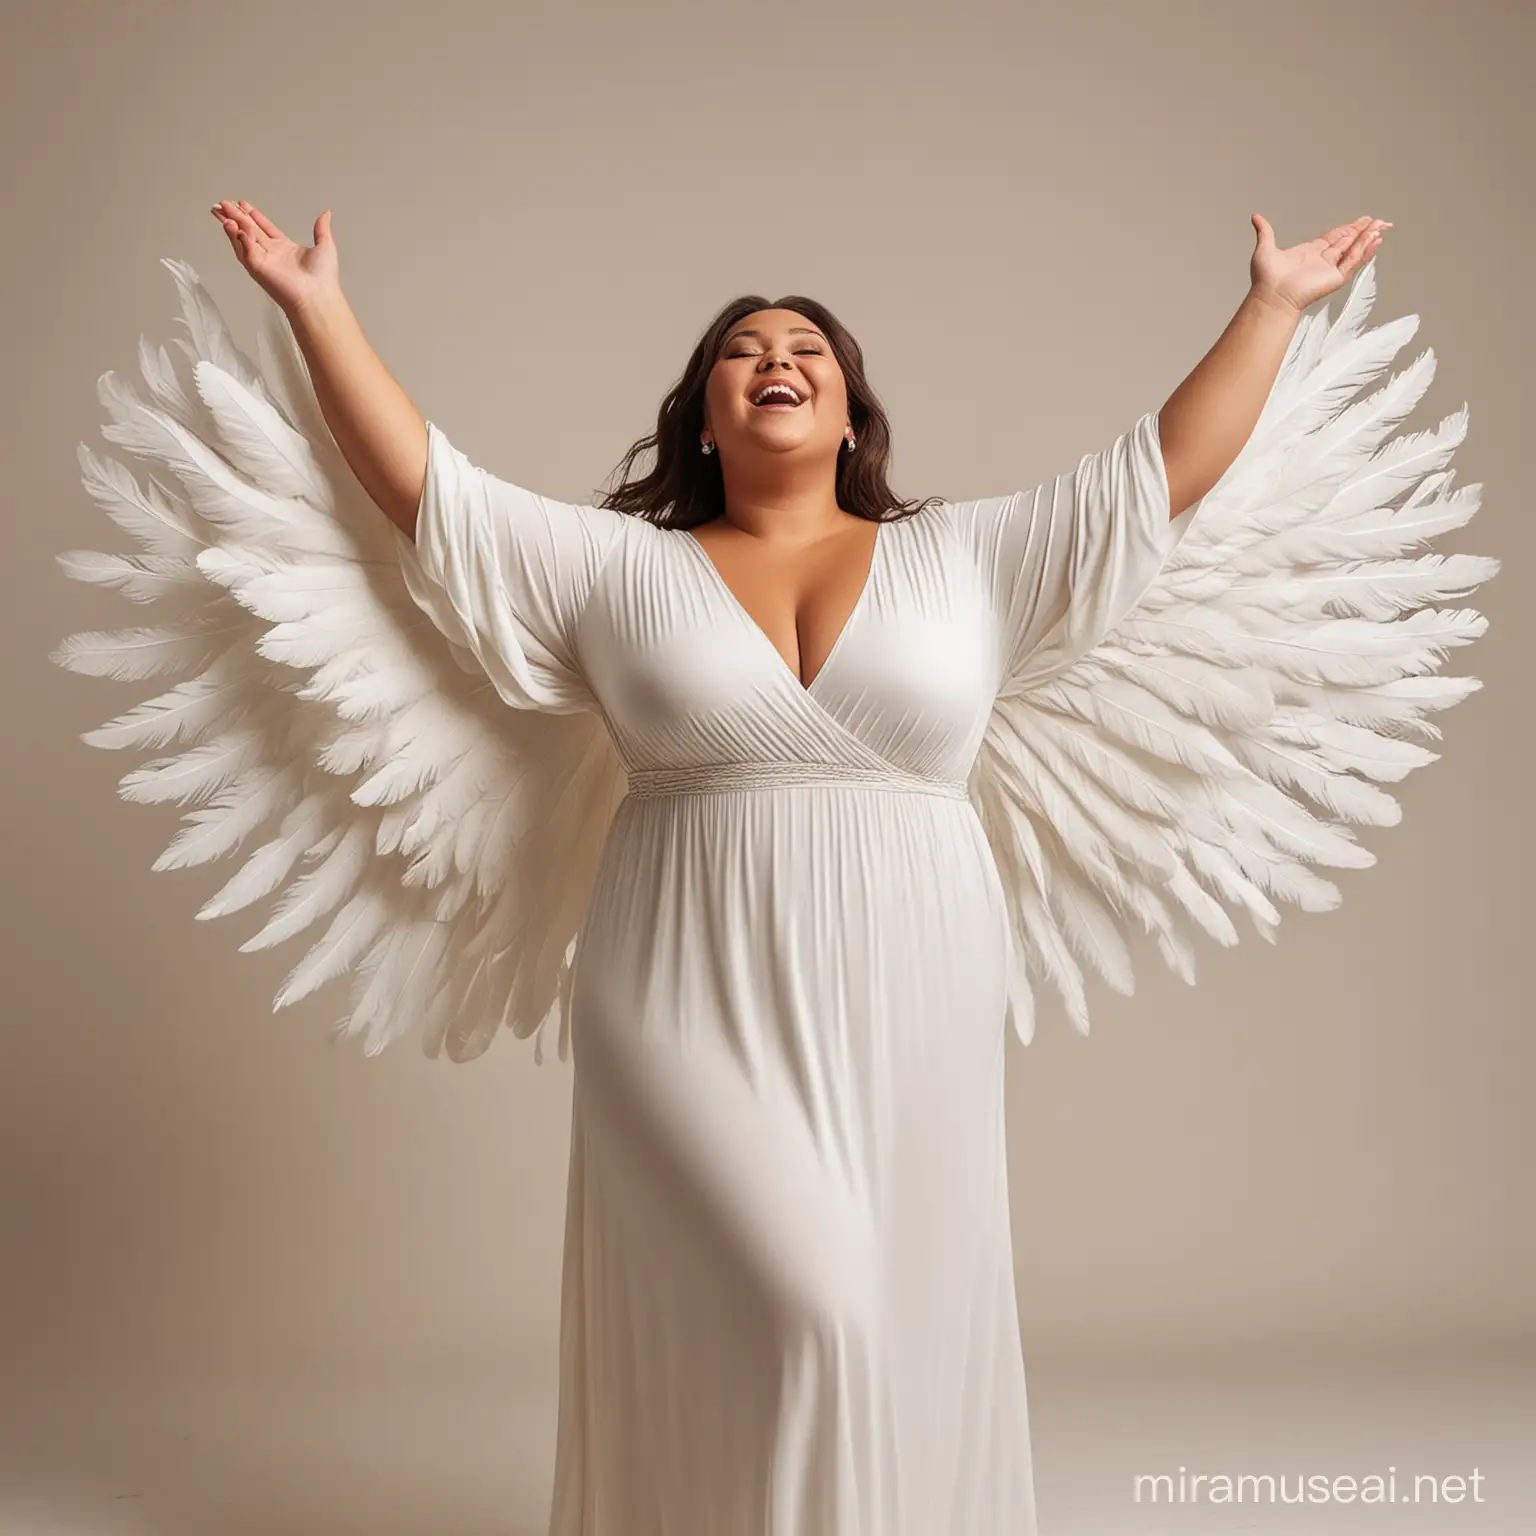 Graceful Plus Size Woman in Extended Arm Feather Long Dress